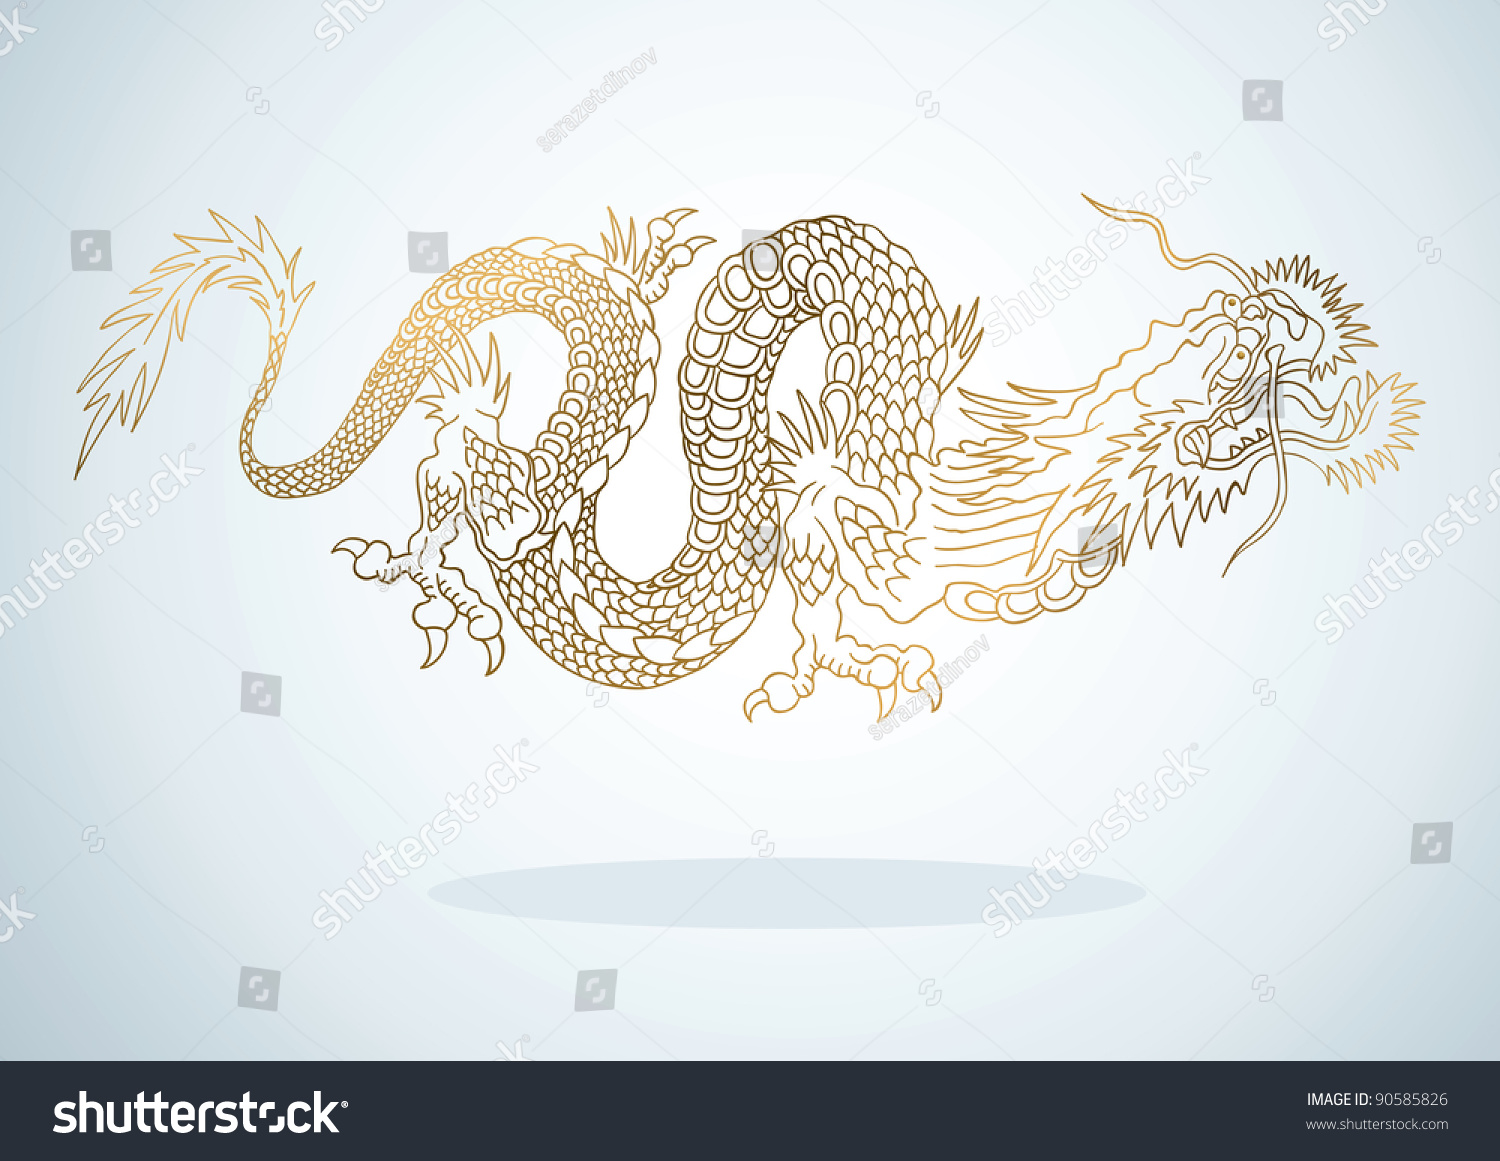 Illustration of golden dragon in the Asian style #90585826